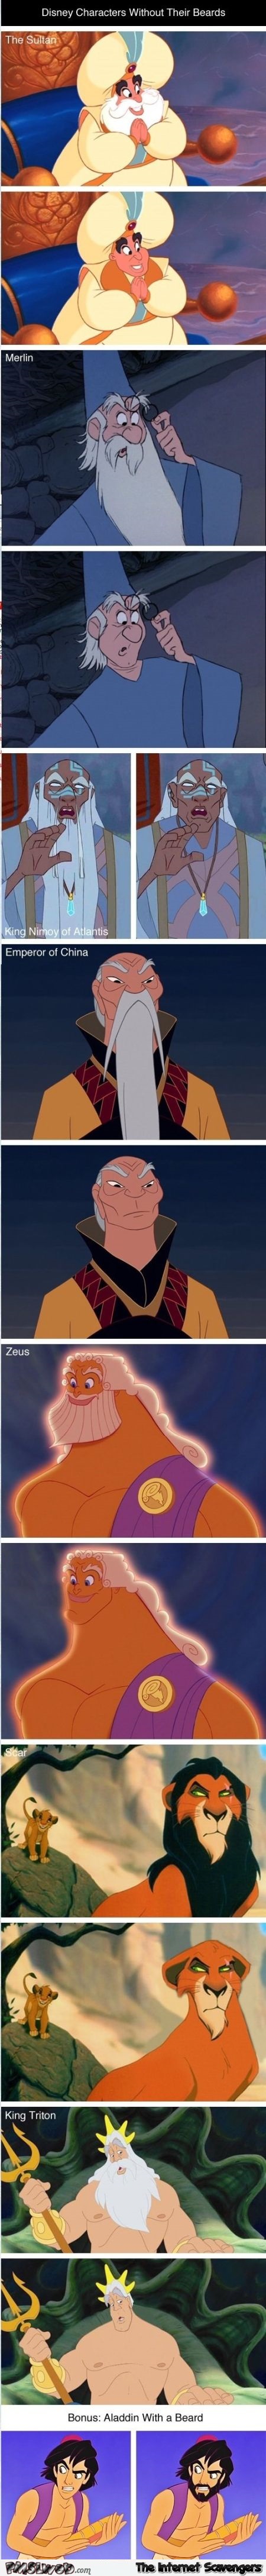 Disney characters without their beards @PMSLweb.com